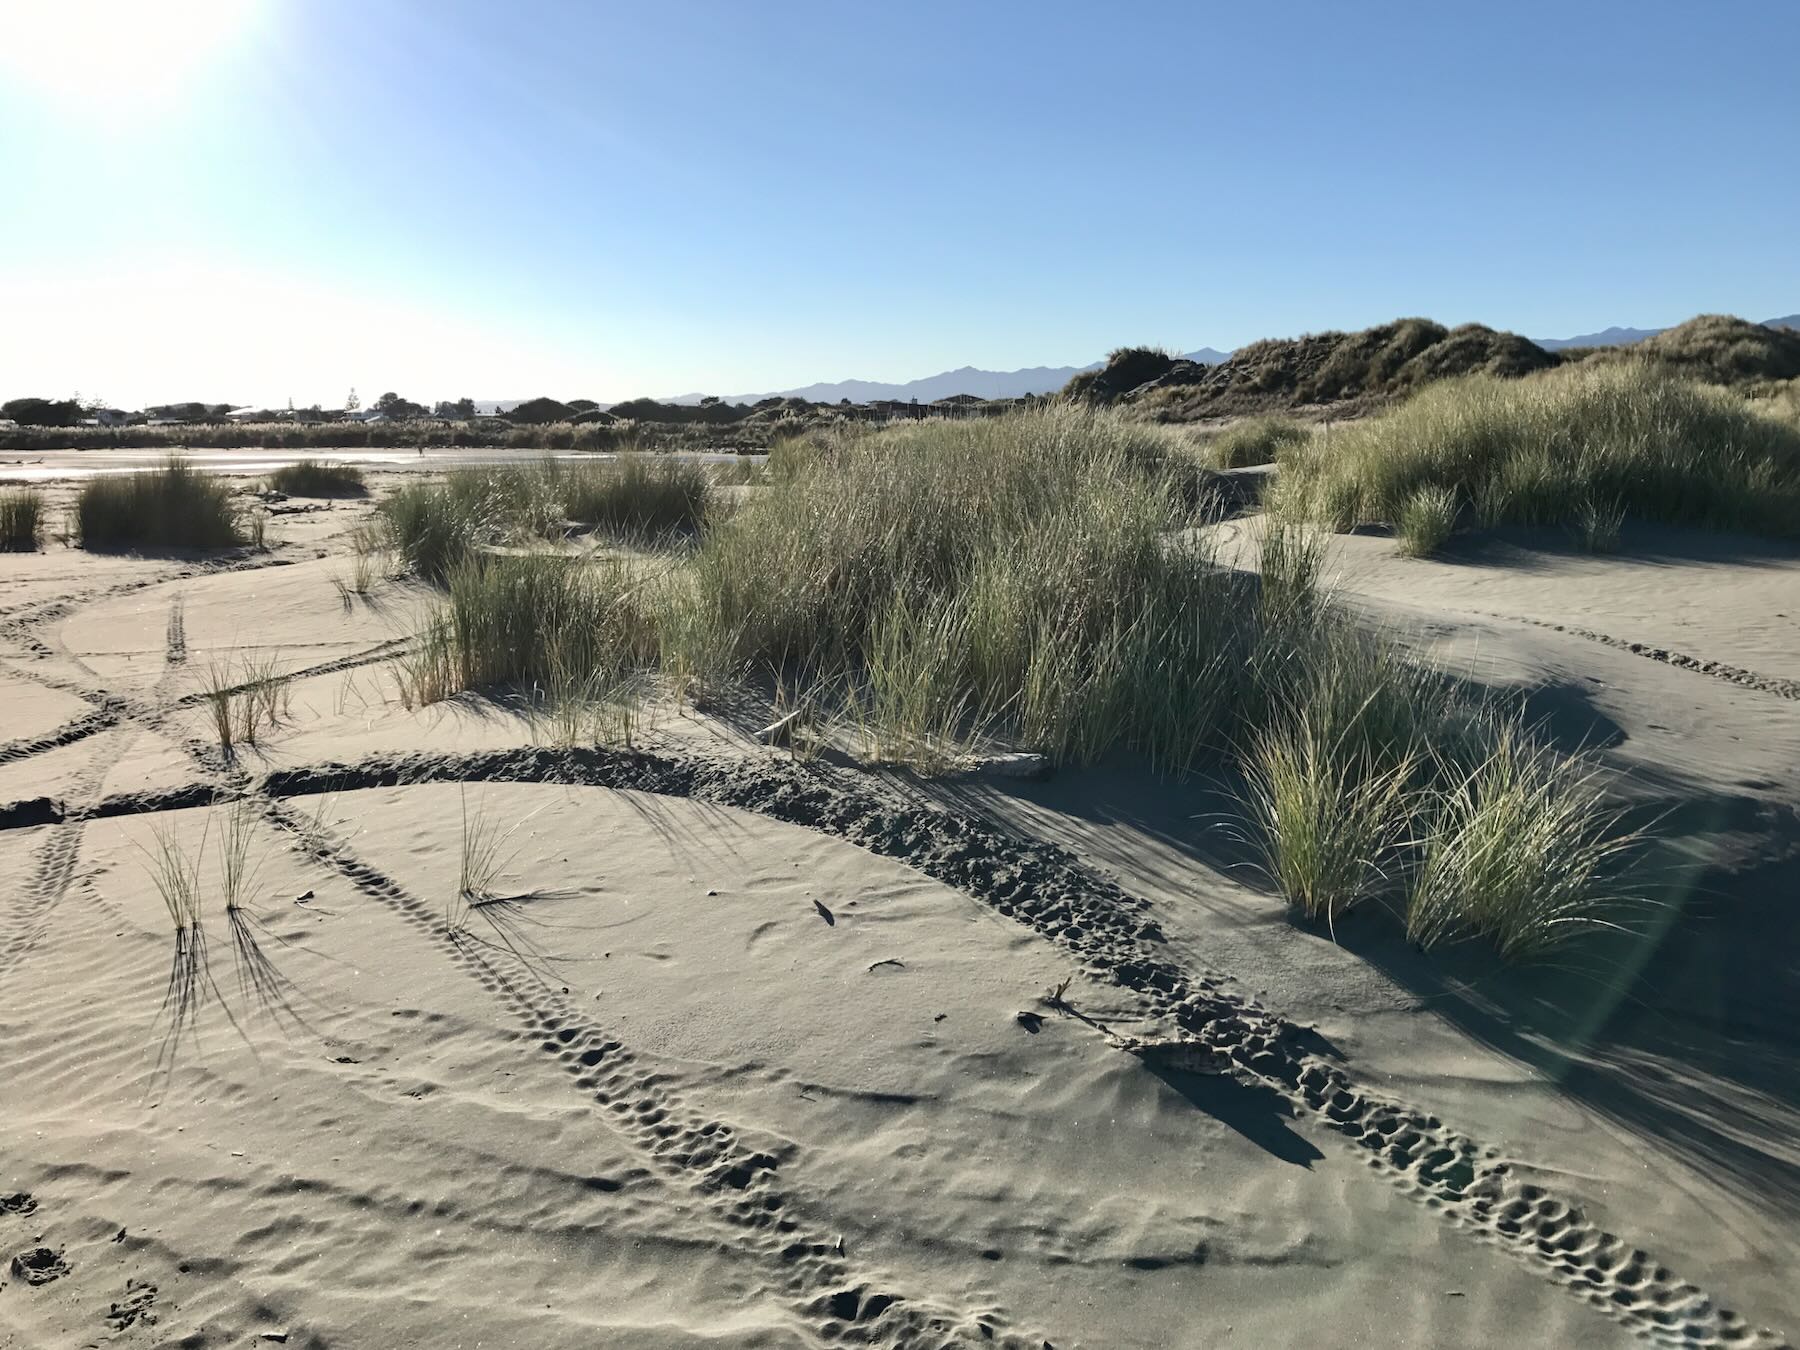 Trailbikes gouge the fragile dunes, August 2017. 